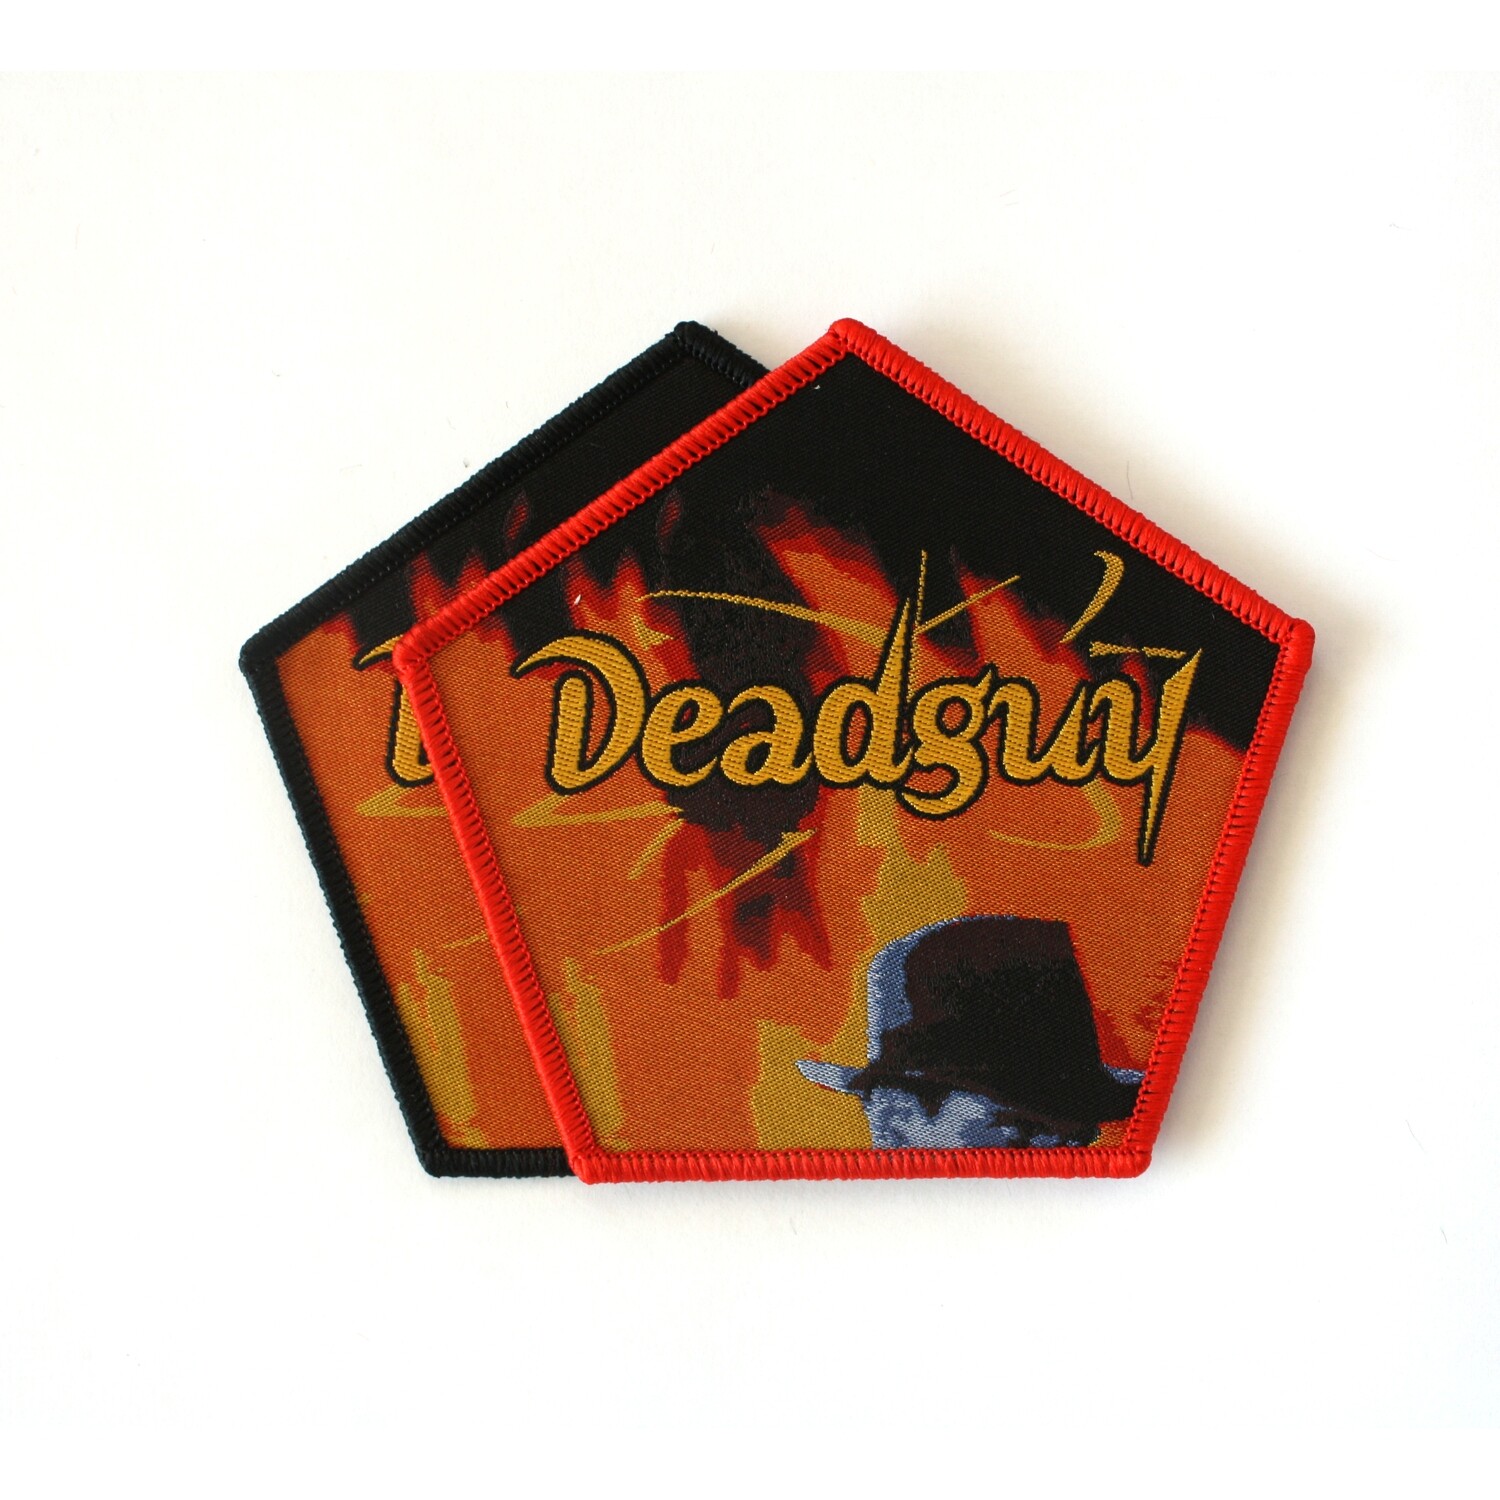 Deadguy - Fixation on a Coworker